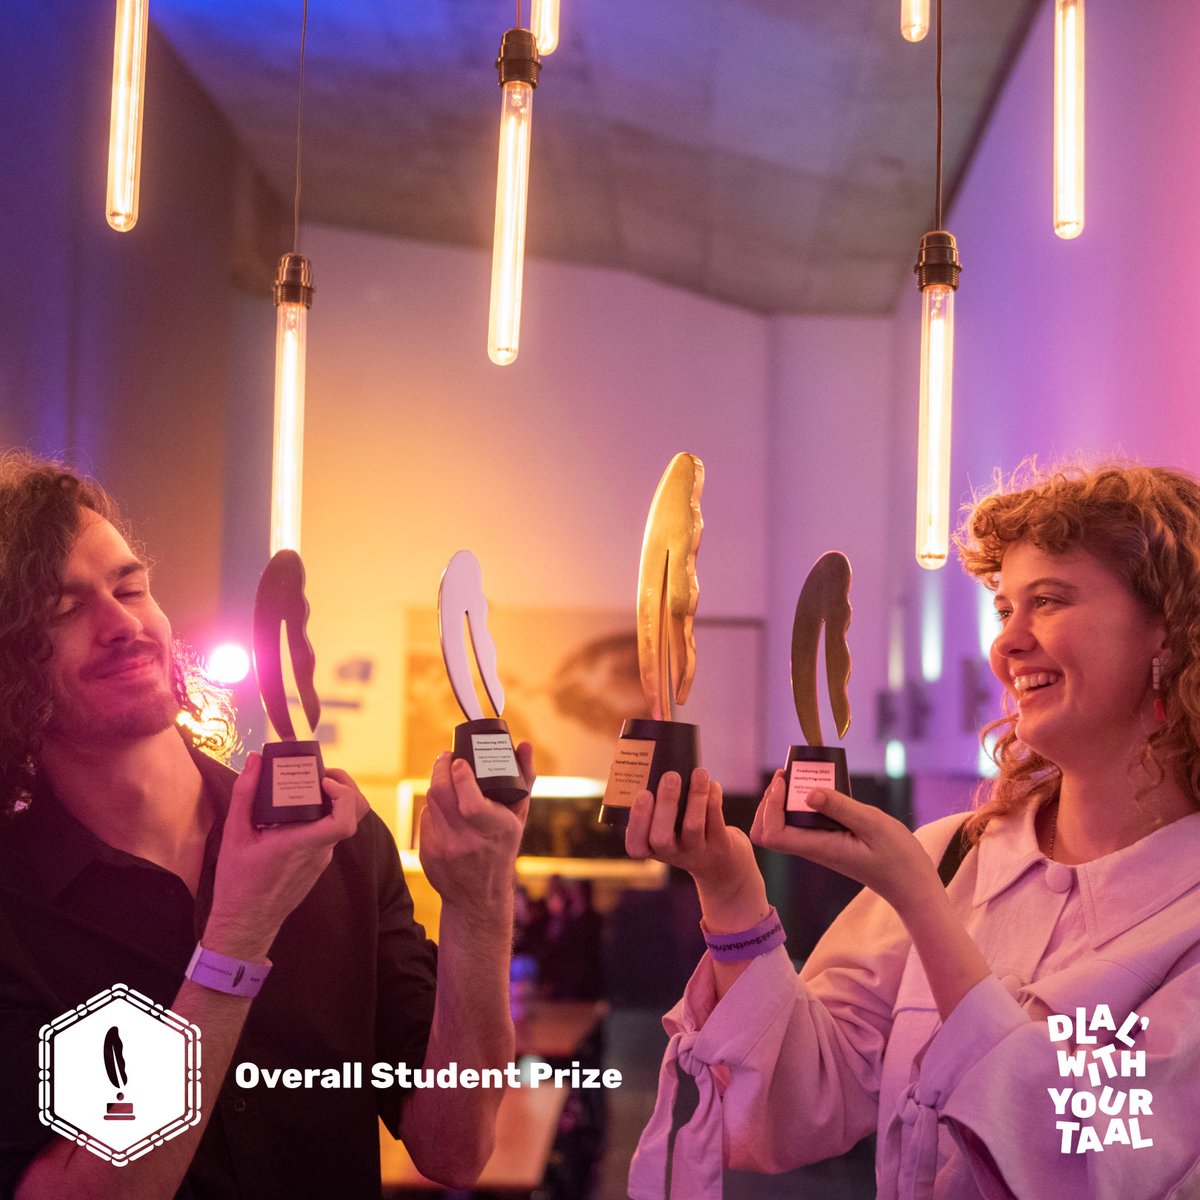 Shayani izandla for @RedAndYellowEd – who took home 2 Golds, 1 Silver, 2 Craft Golds, and 3 Craft Certificates. Student Duncan Schröder and lecturer Wilna Combrinck also took home the 2023 Overall Student Prize for the 'Melktert' project. Chesa! #DlalWithYourTaal